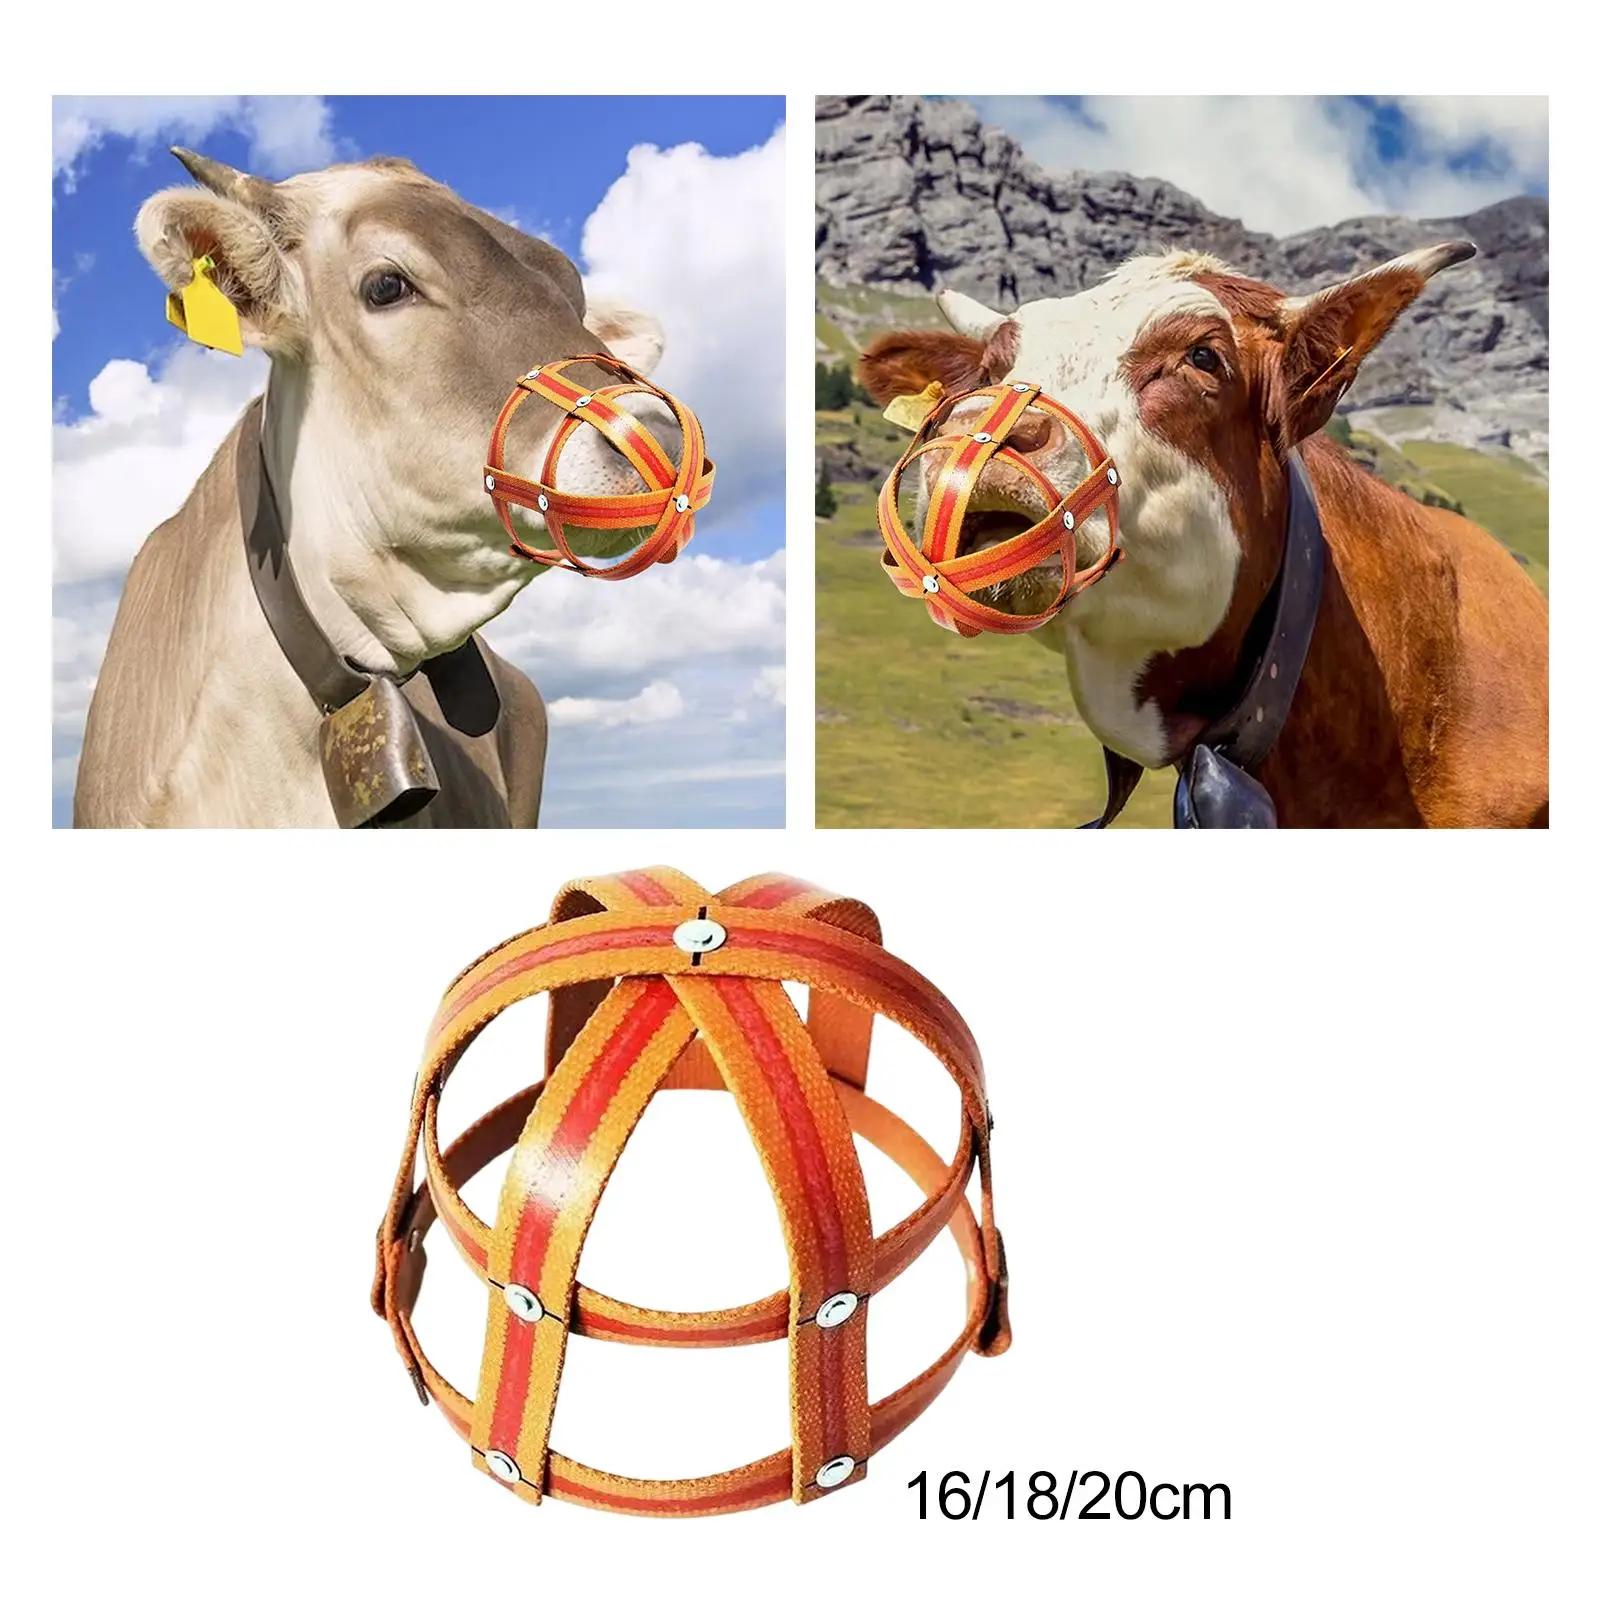 Horse Grazing Muzzle Comfort Prevent Horse Bites Horse Mouth Cover Harness for Sow Farm Animal Cow Equestrian Equipment Horse